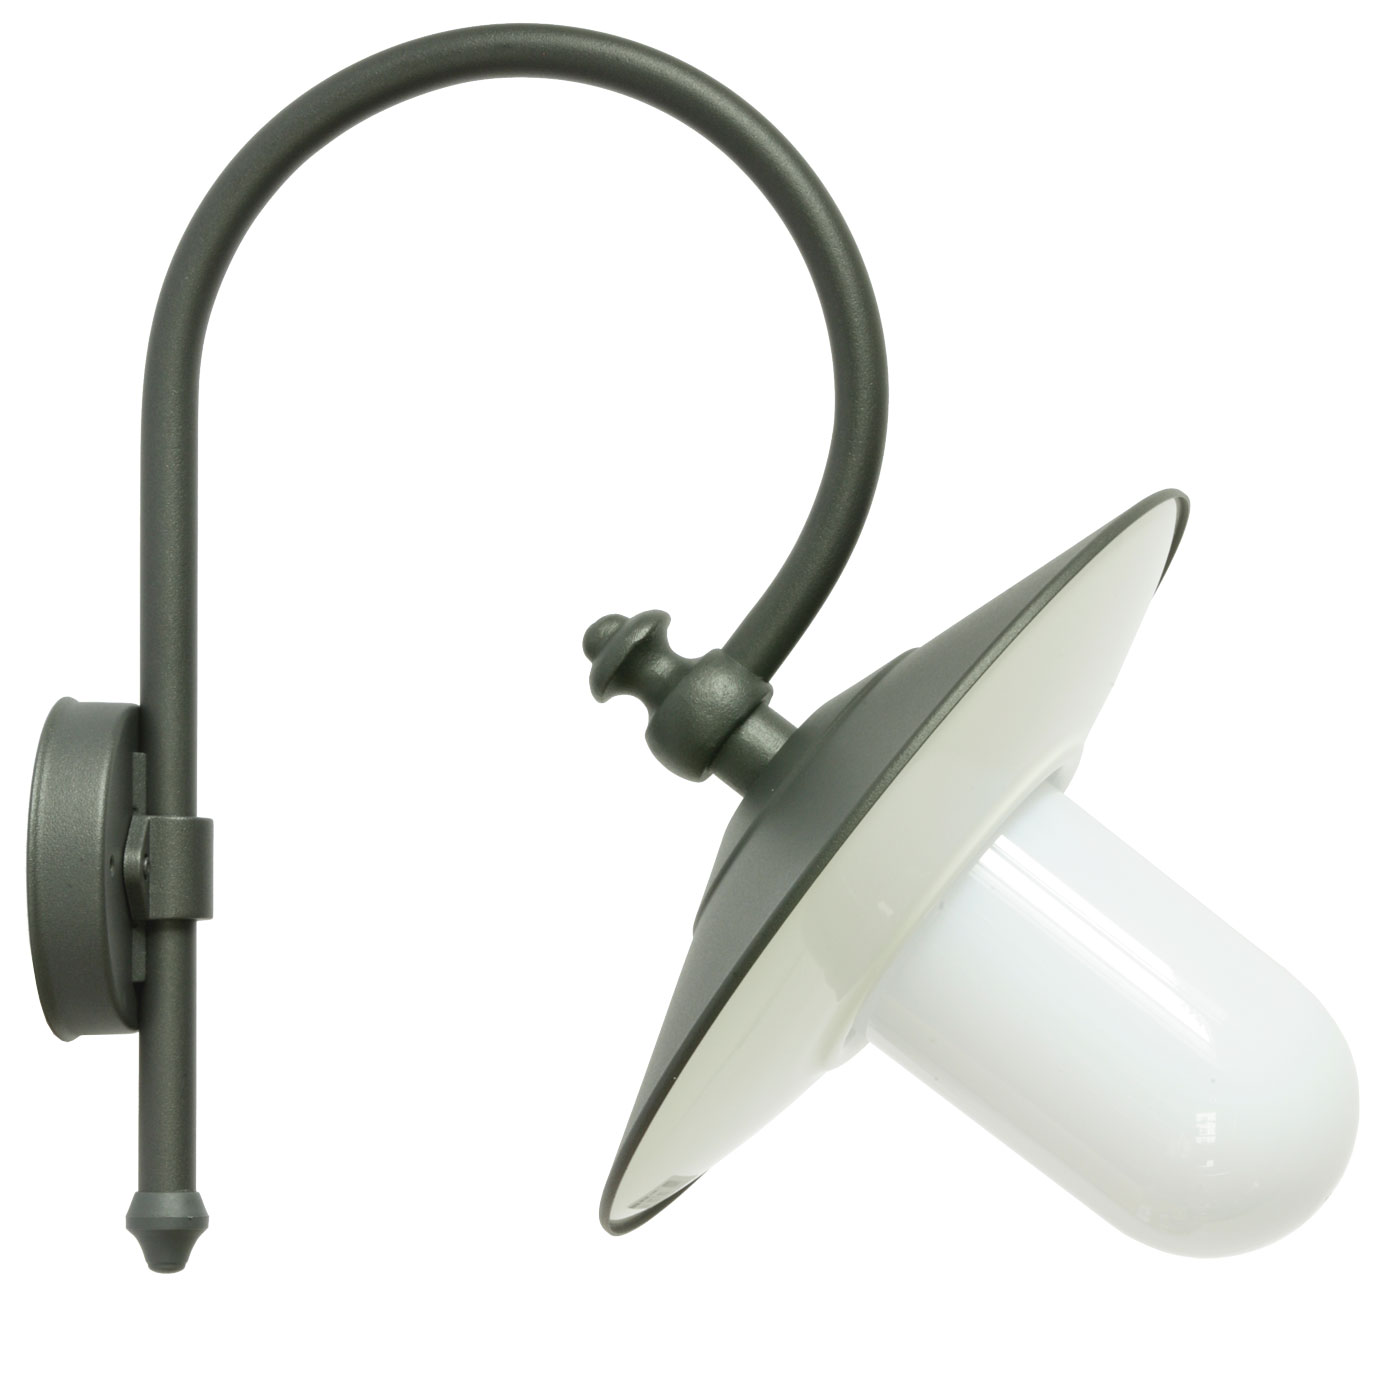 Forward-facing Wall Lamp with Bow Arm for Outdoors